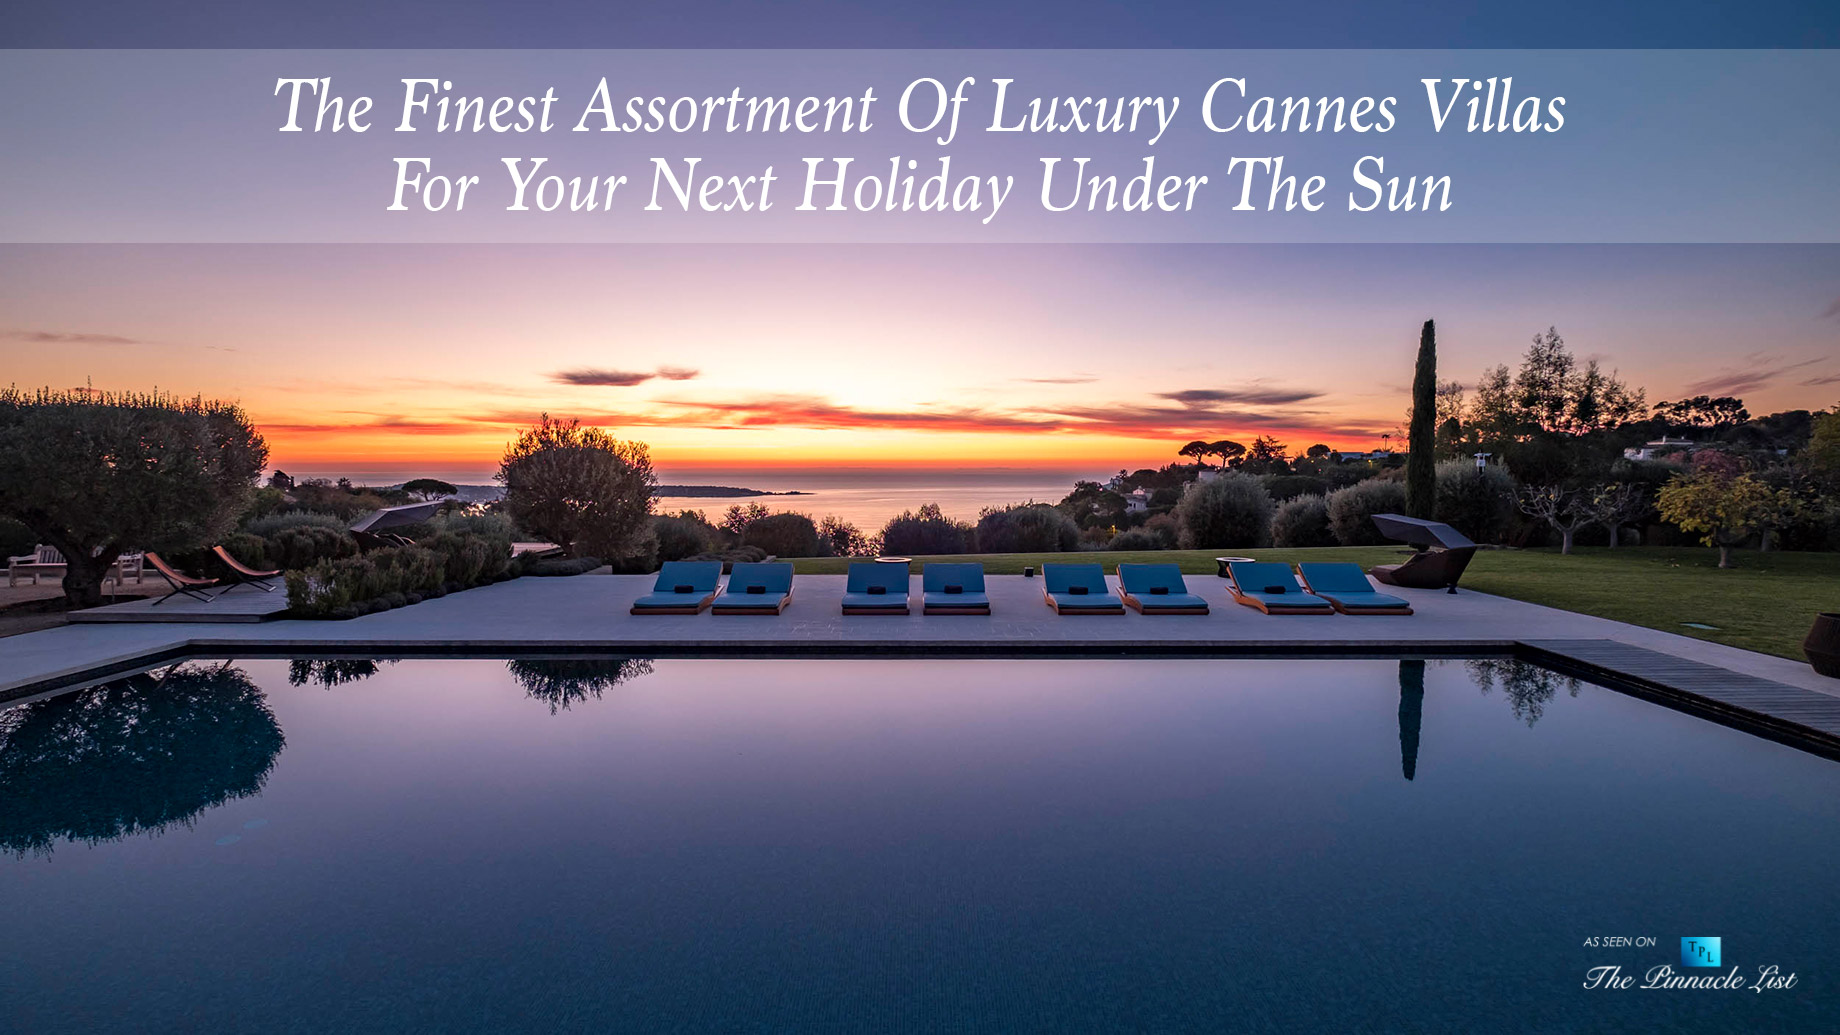 The Finest Assortment Of Luxury Cannes Villas For Your Next Holiday Under The Sun